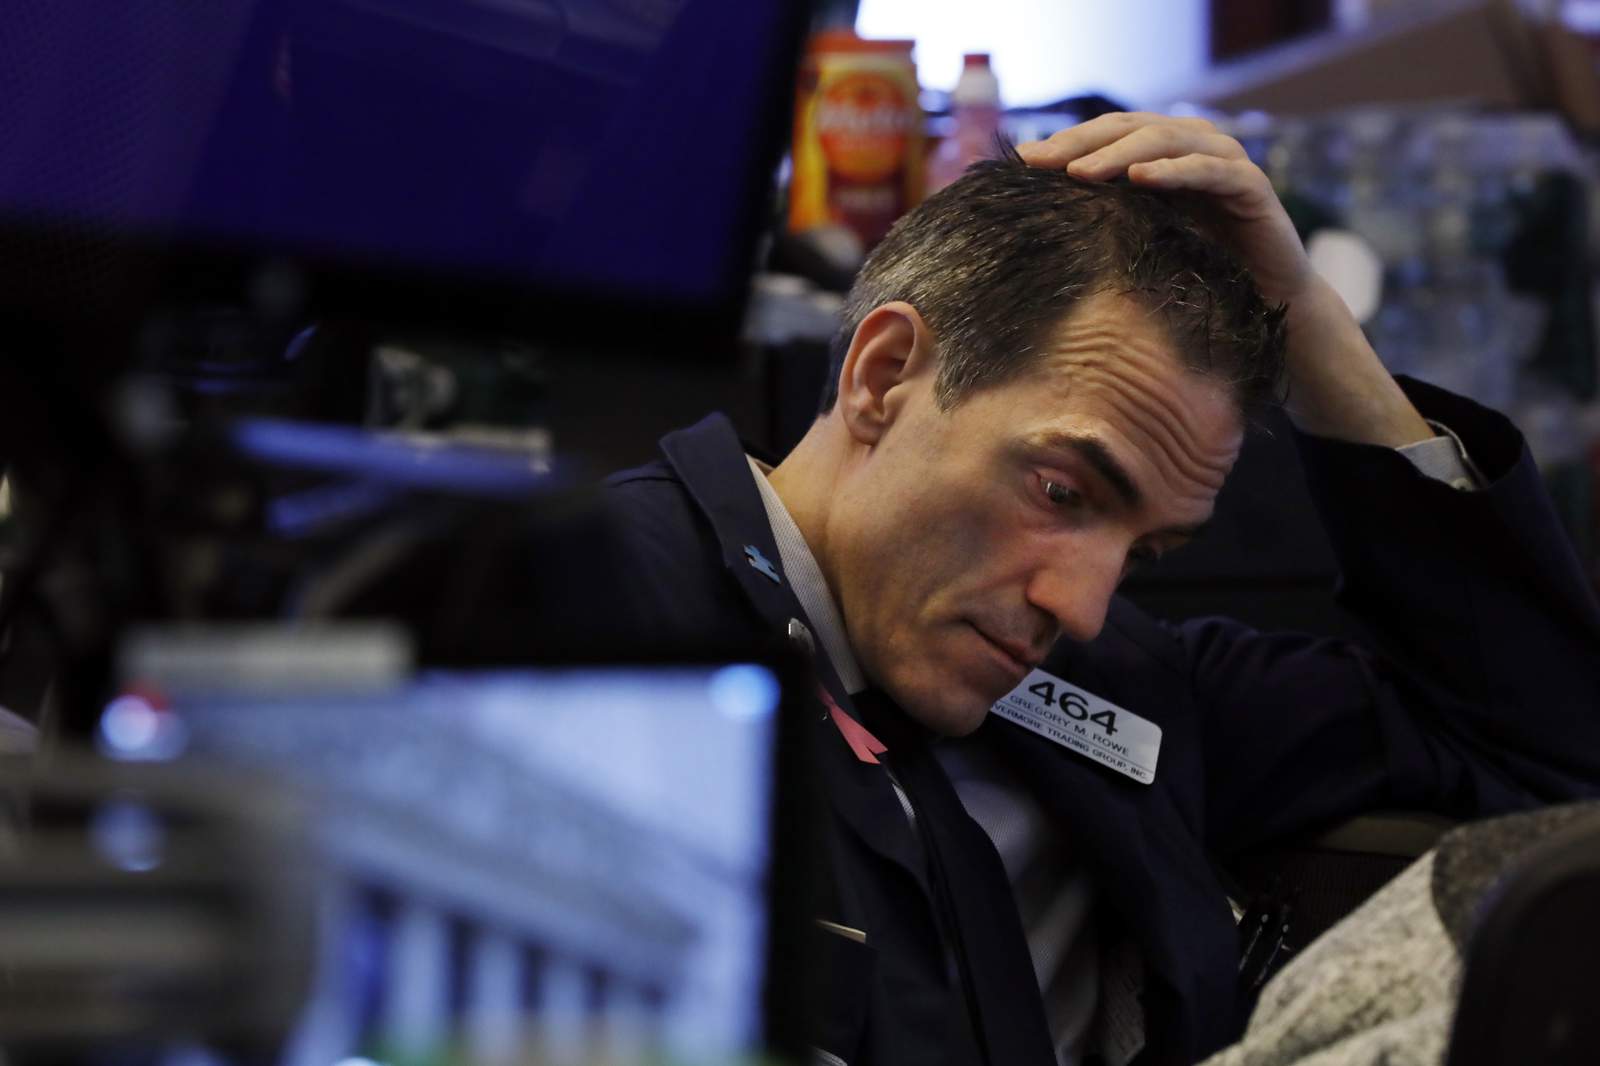 Trading On New York Stock Exchange Paused As Stock Prices Plummet